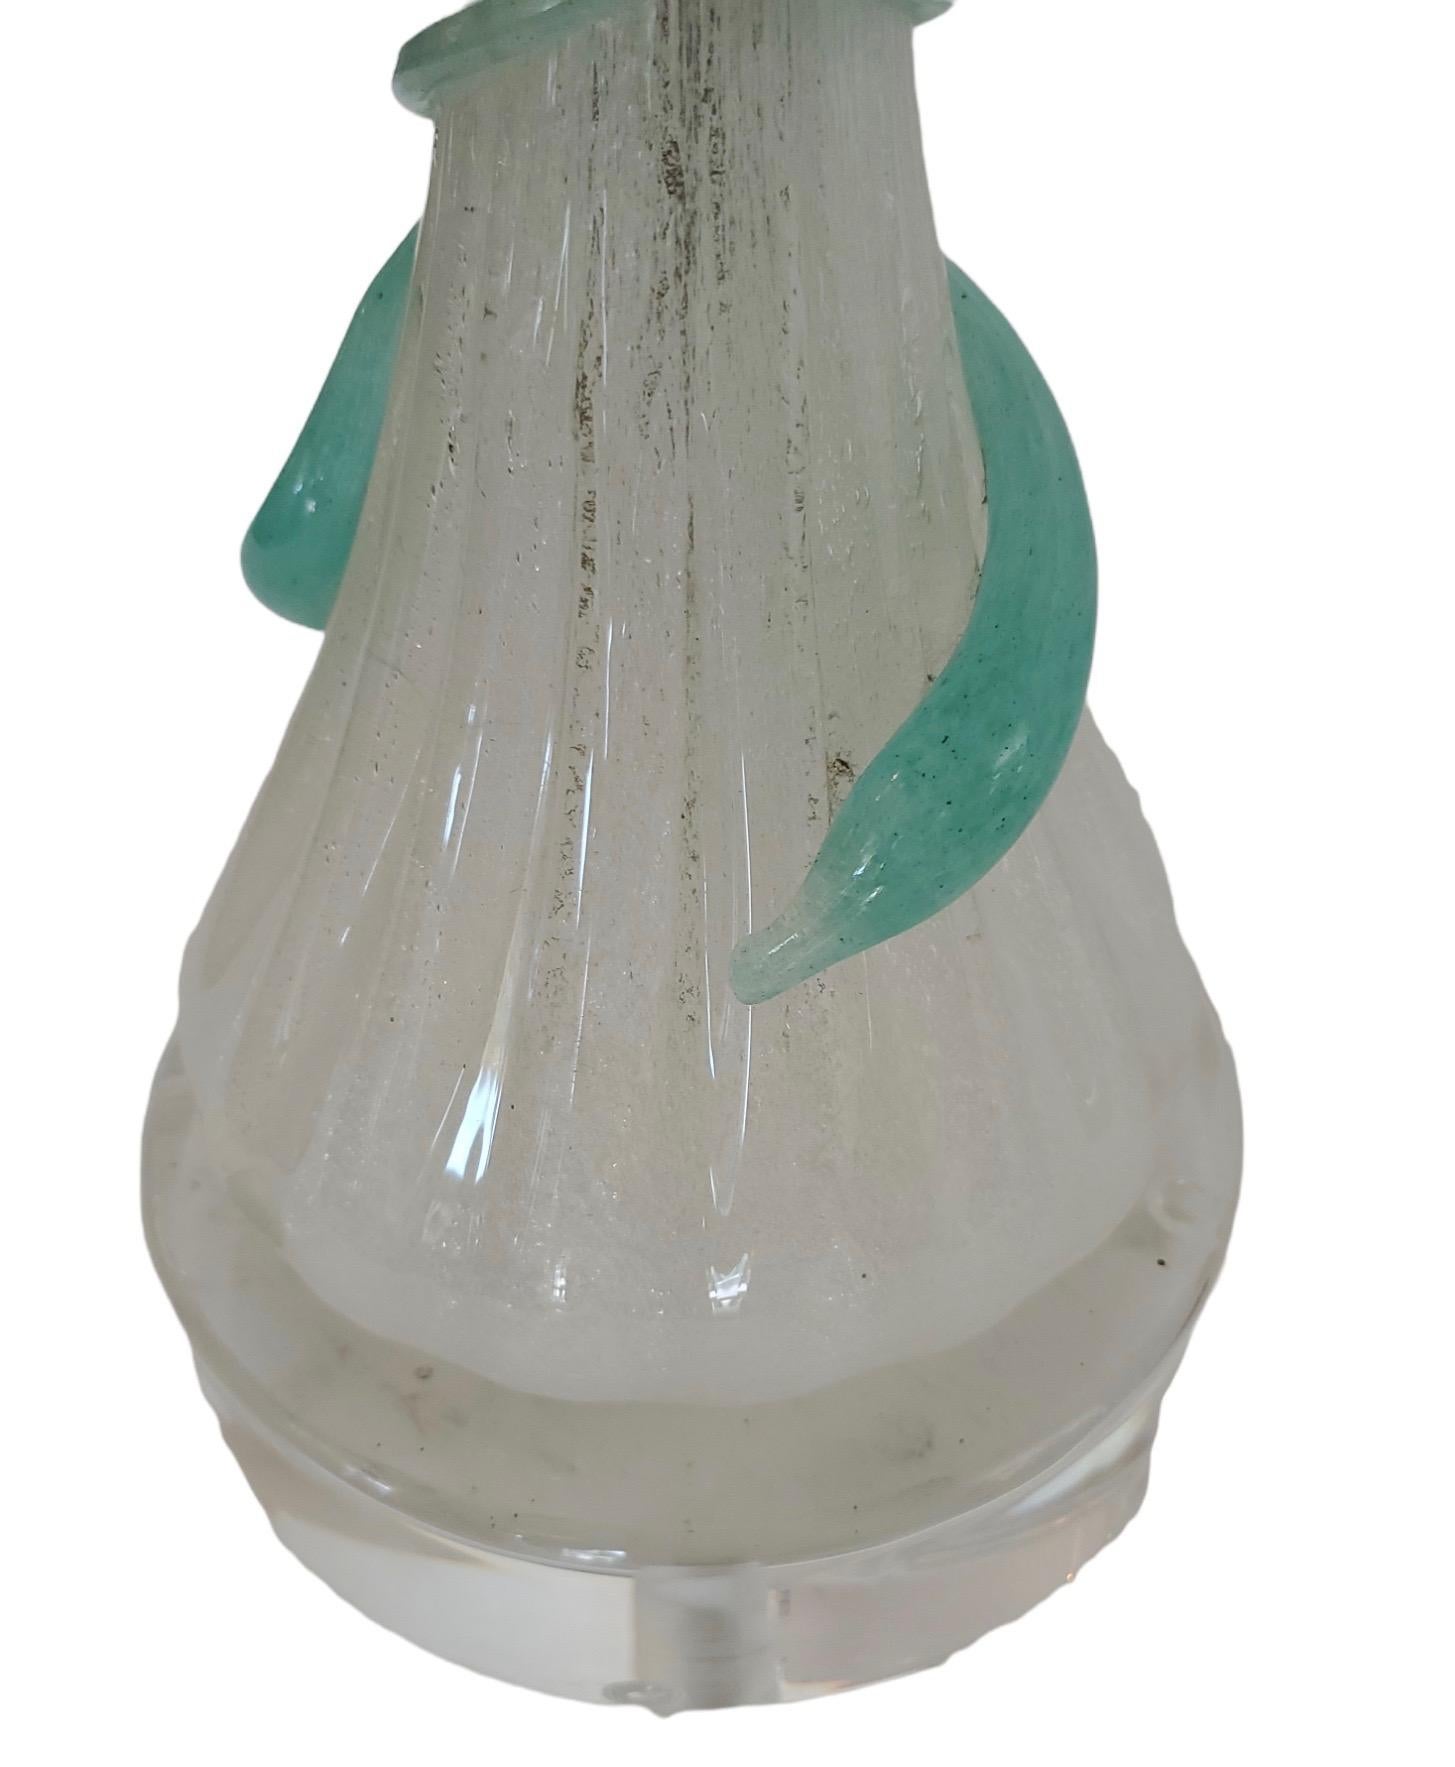 MId-century Venetian lamp with many controlled bubbles throughout. With applied aqua glass swirls. Custom parchment shade. New acrylic base. Shade dimension is 7